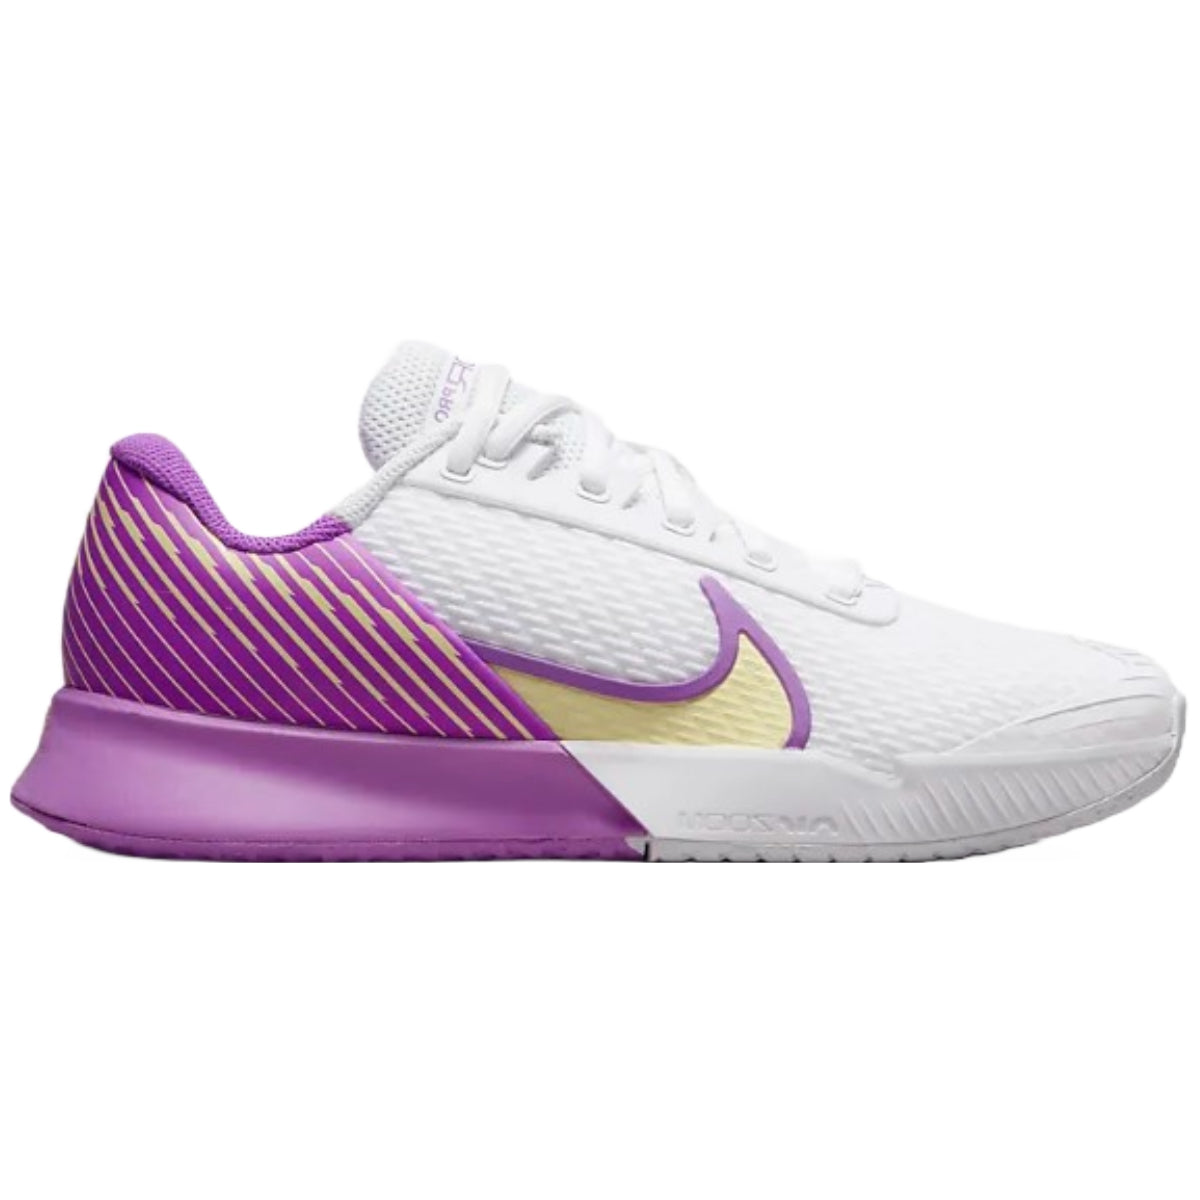 Nike Zoom Vapor 2 Tennis Shoes - 100 – All About Tennis